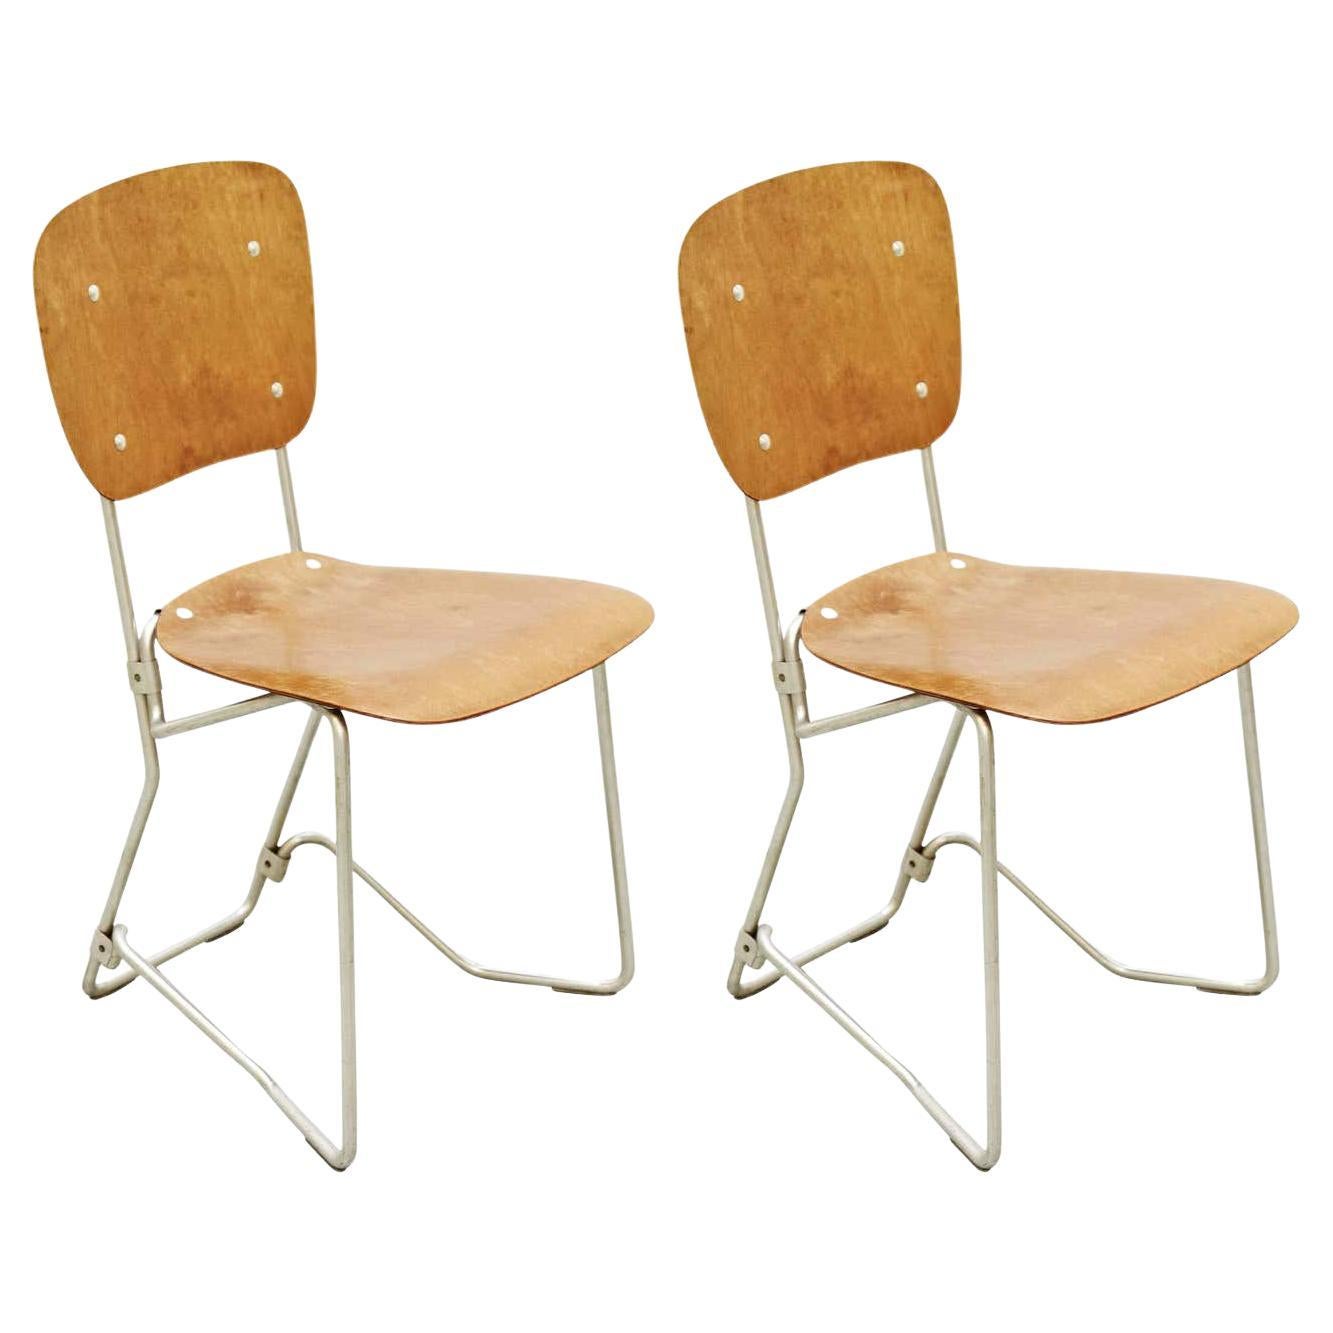 Aluflex First Edition Pair of Chairs by Armin Wirth